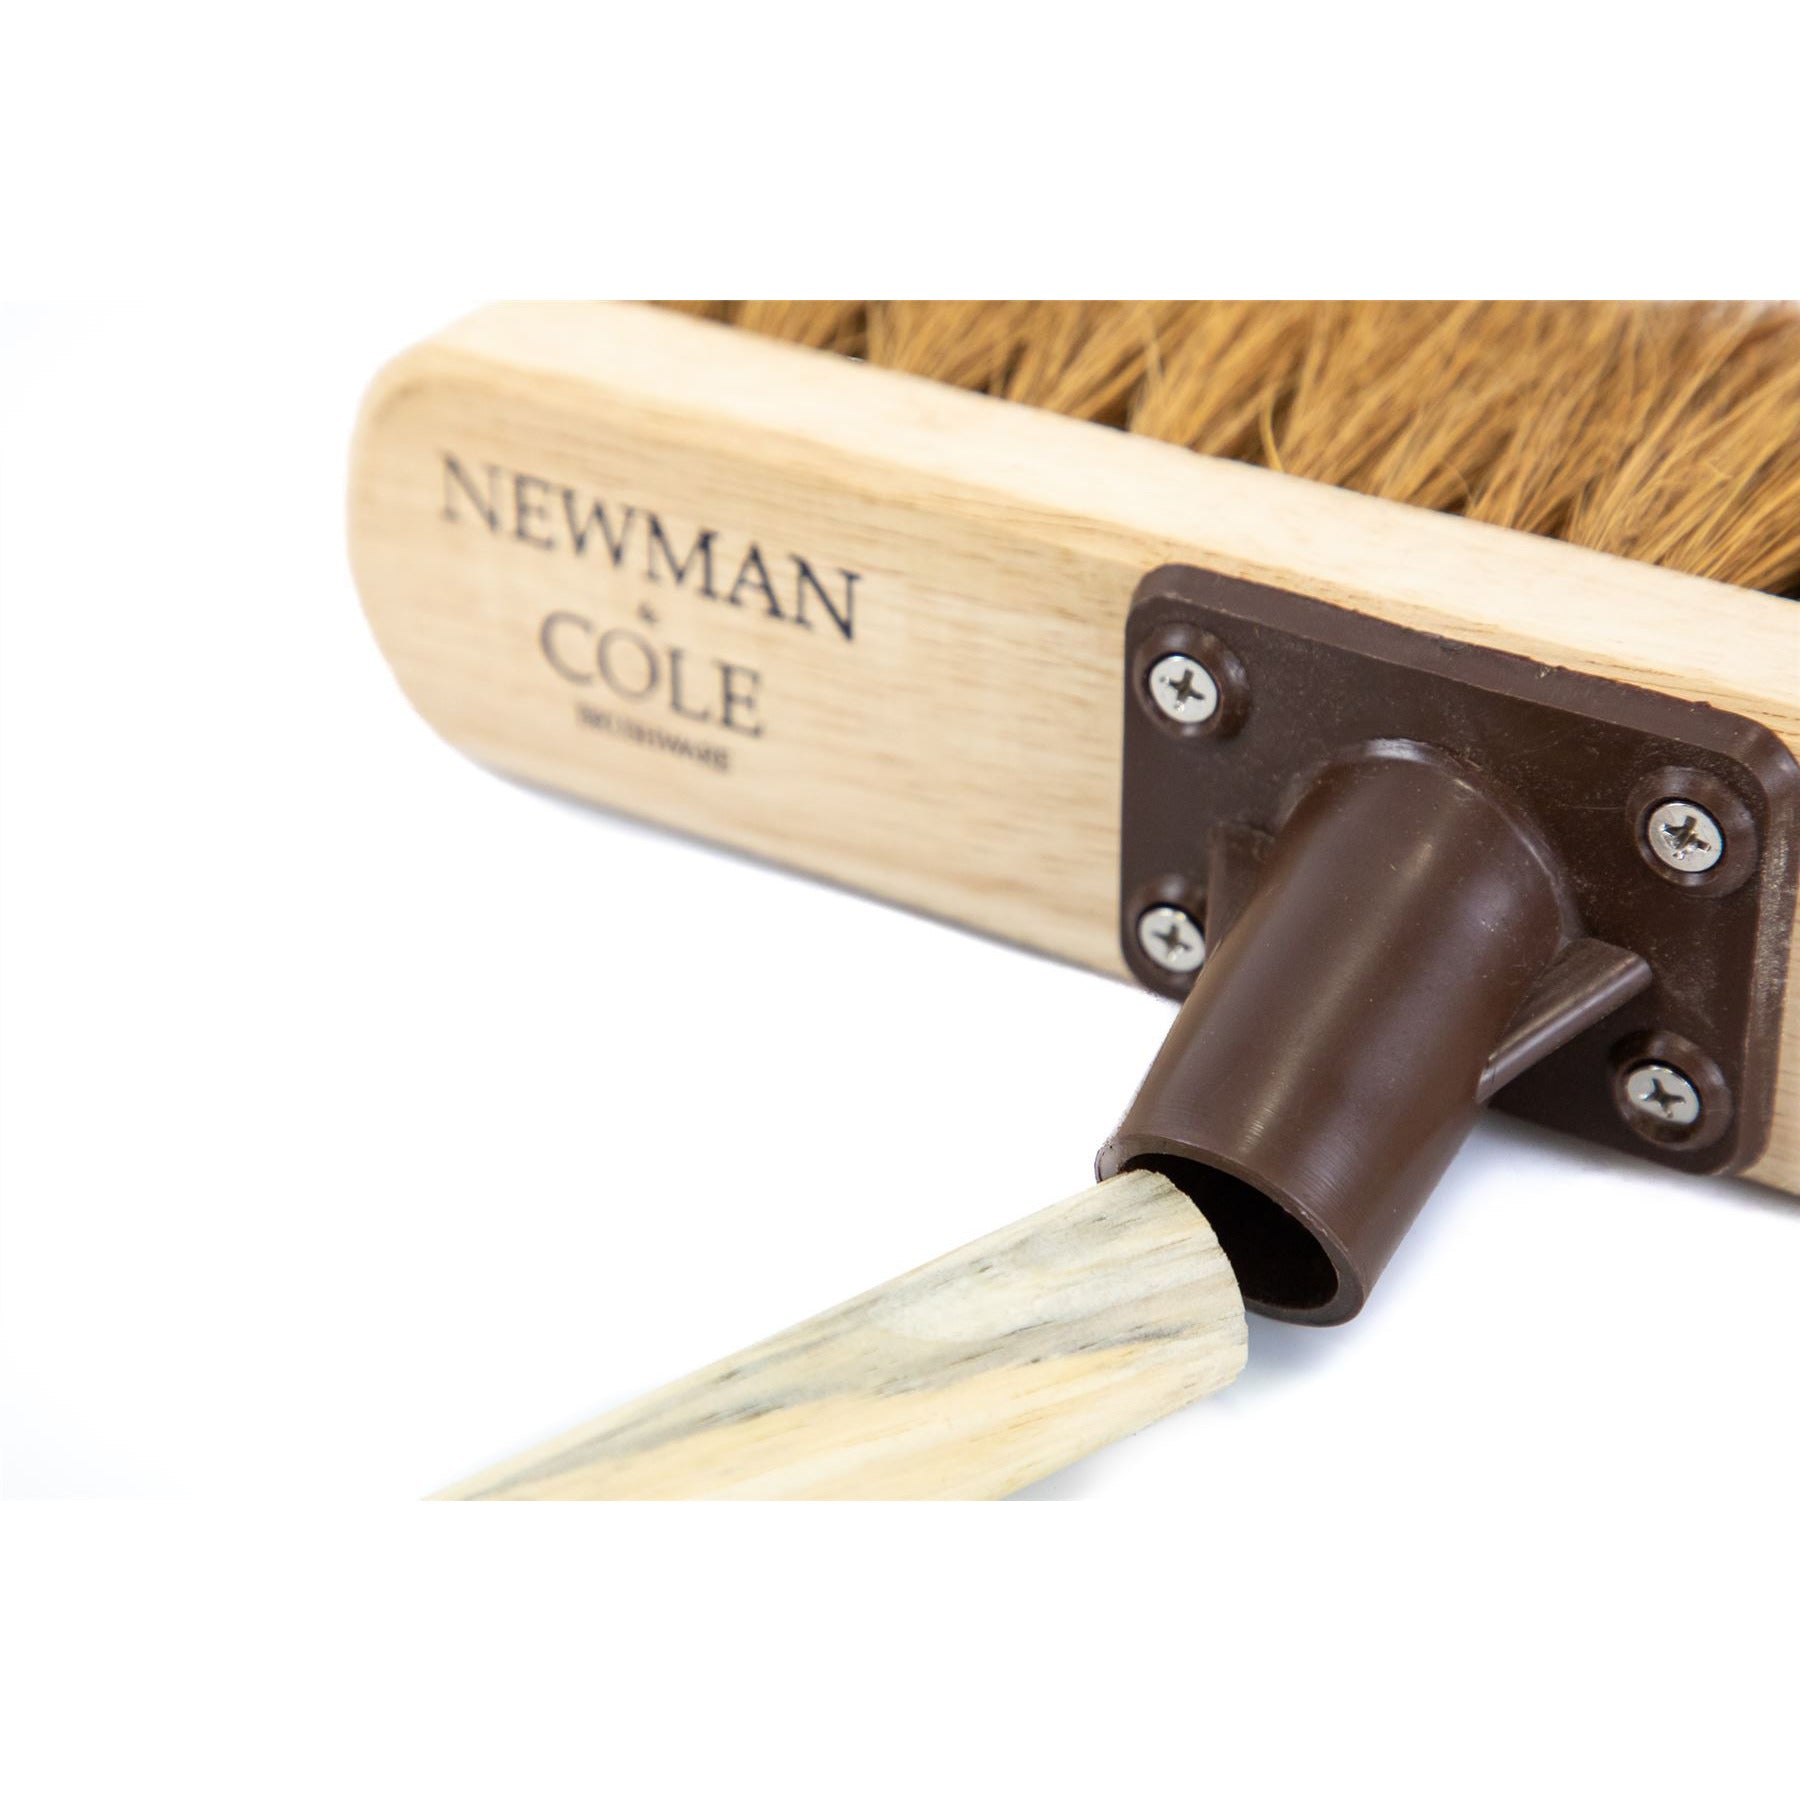 Newman and Cole 12" Natural Coco Broom Head with Plastic Socket - The Dustpan and Brush Store